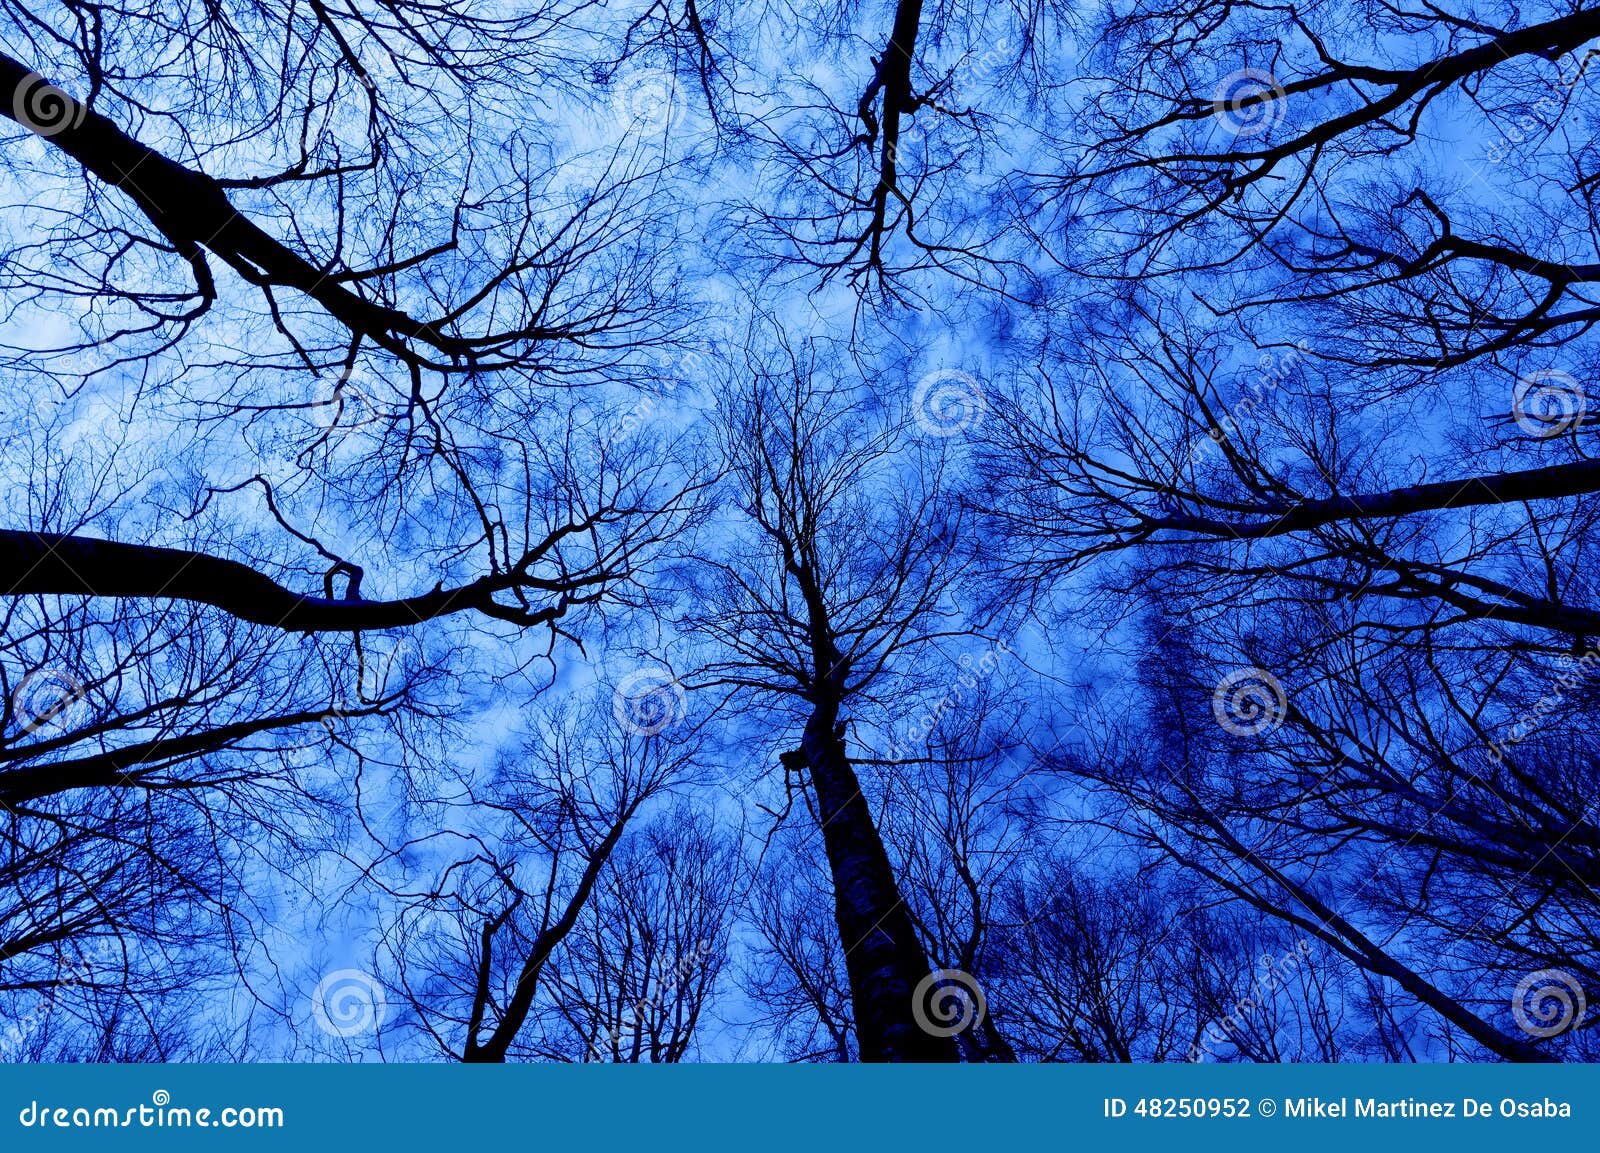 Horror forest at night stock photo. Image of angle, branch - 48250952